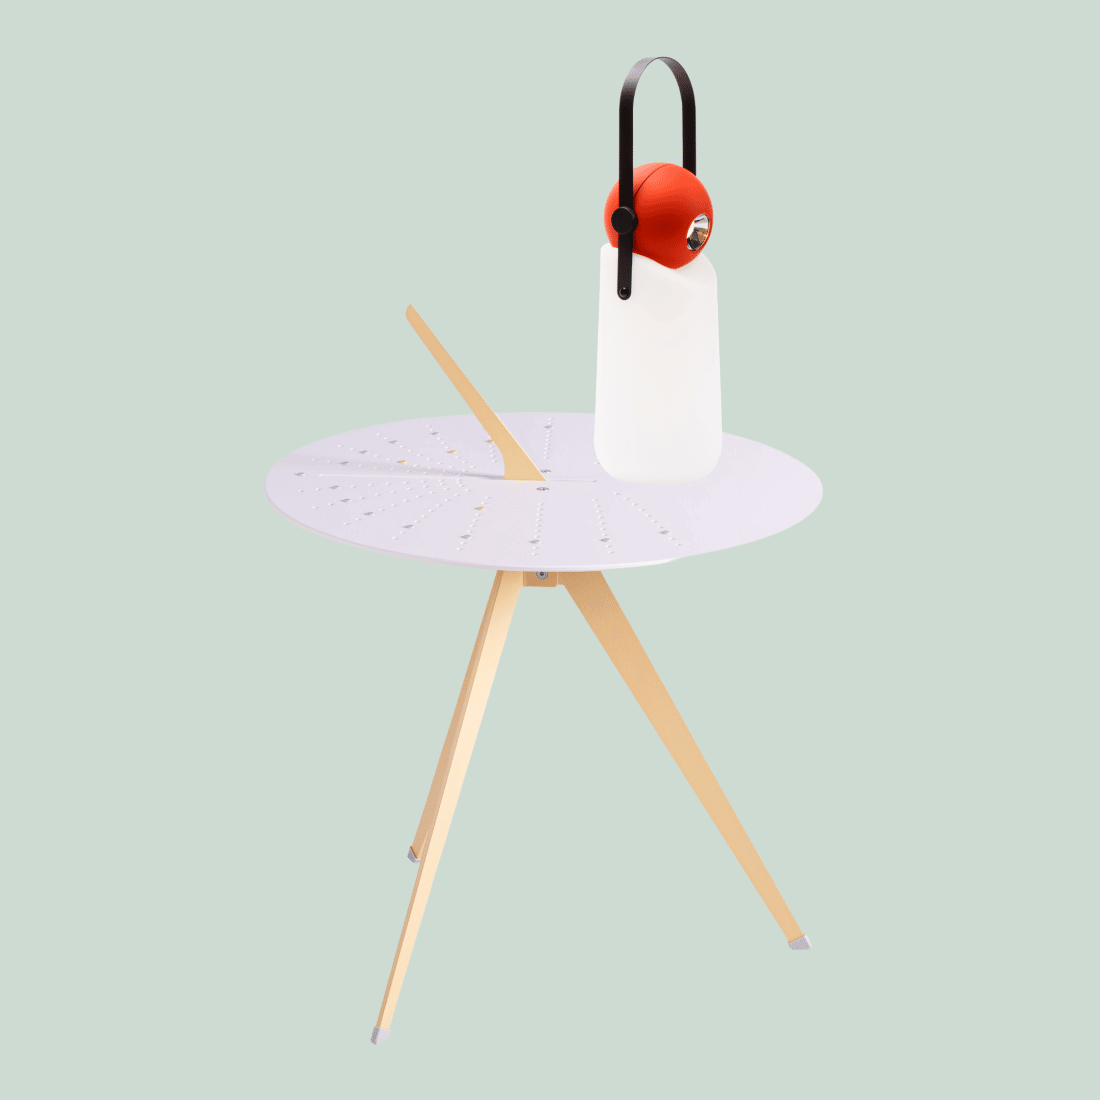 This combination is also possible yellow sundial table with red guidelight